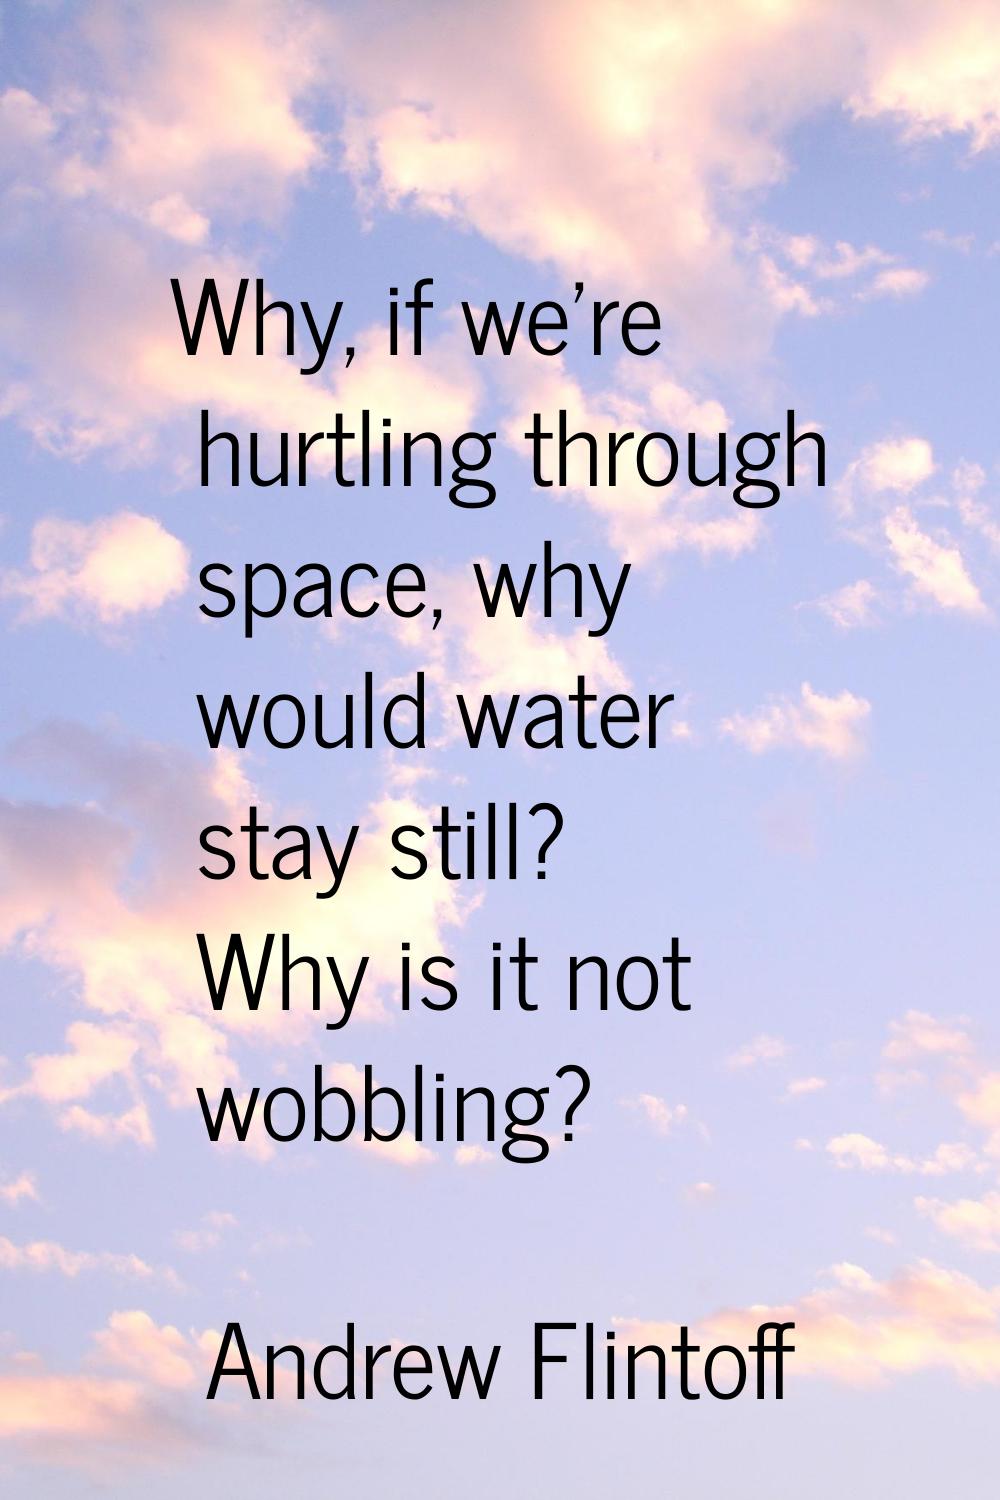 Why, if we're hurtling through space, why would water stay still? Why is it not wobbling?